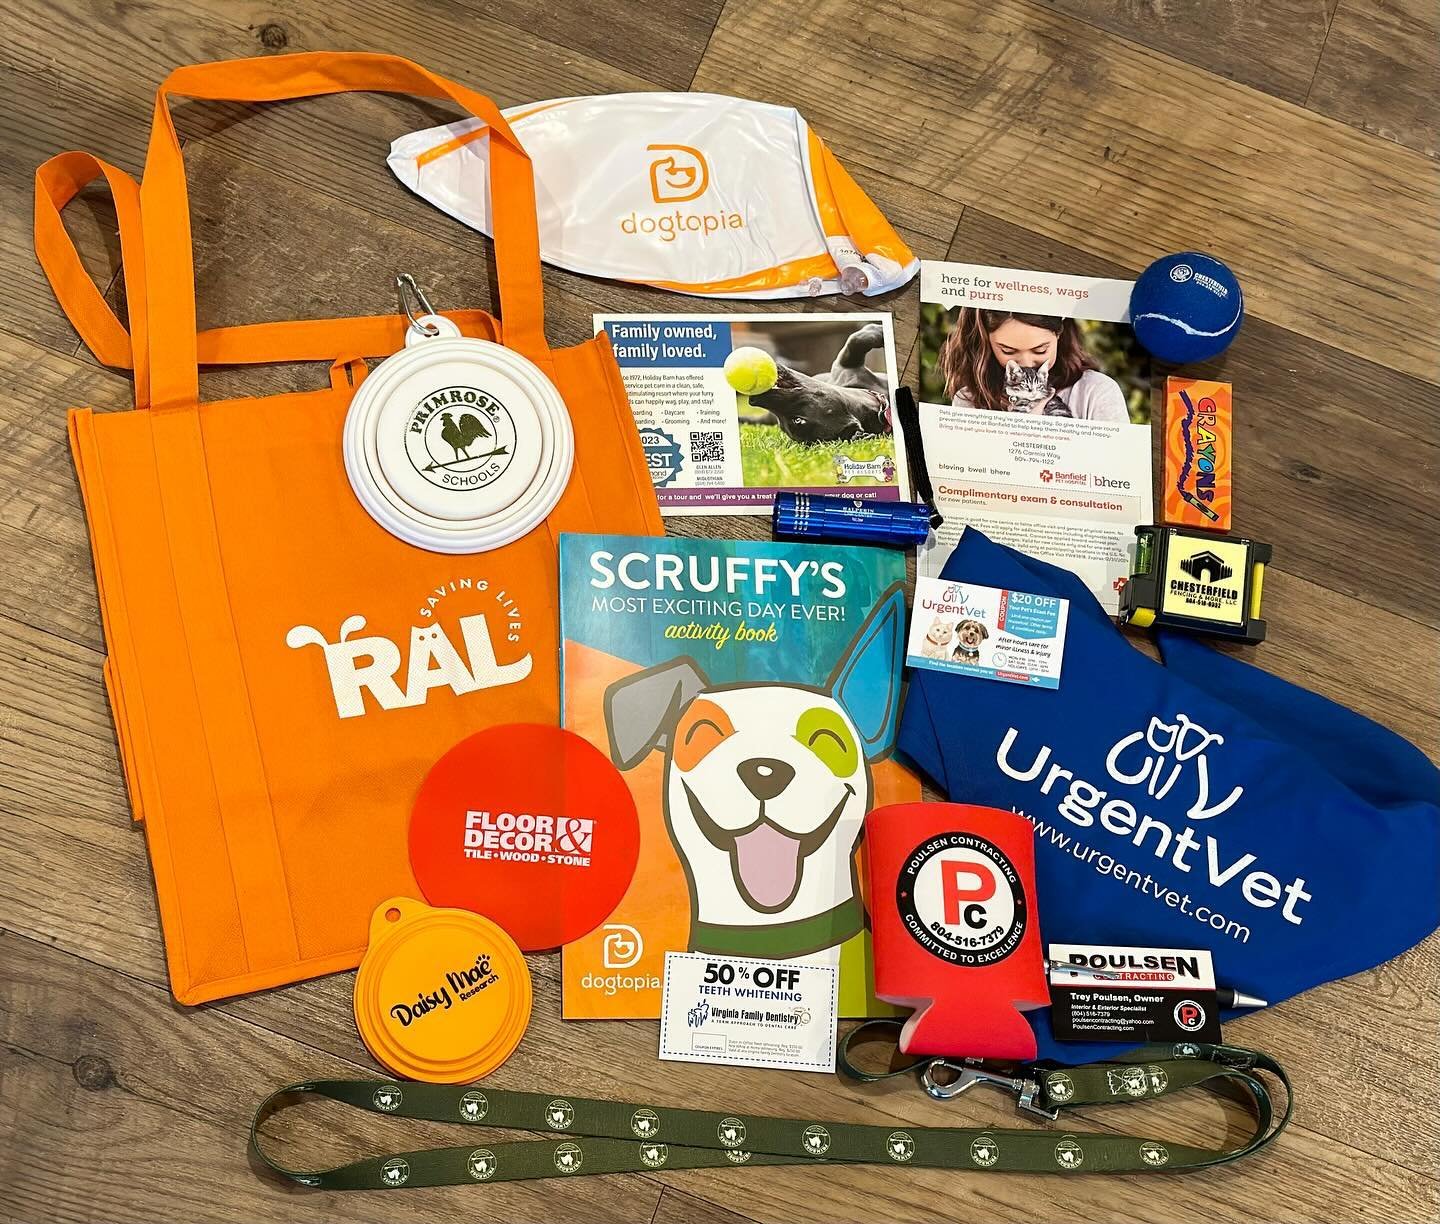 🐾 Get ready to paw-ty at Woofstock this Saturday presented by @primroseschools of the Greater Richmond Area! 🎉 The first 600 attendees will fetch themselves a swag bag filled with goodies from some of our amazing sponsors! 🐶✨ 

🗓️Saturday, April 